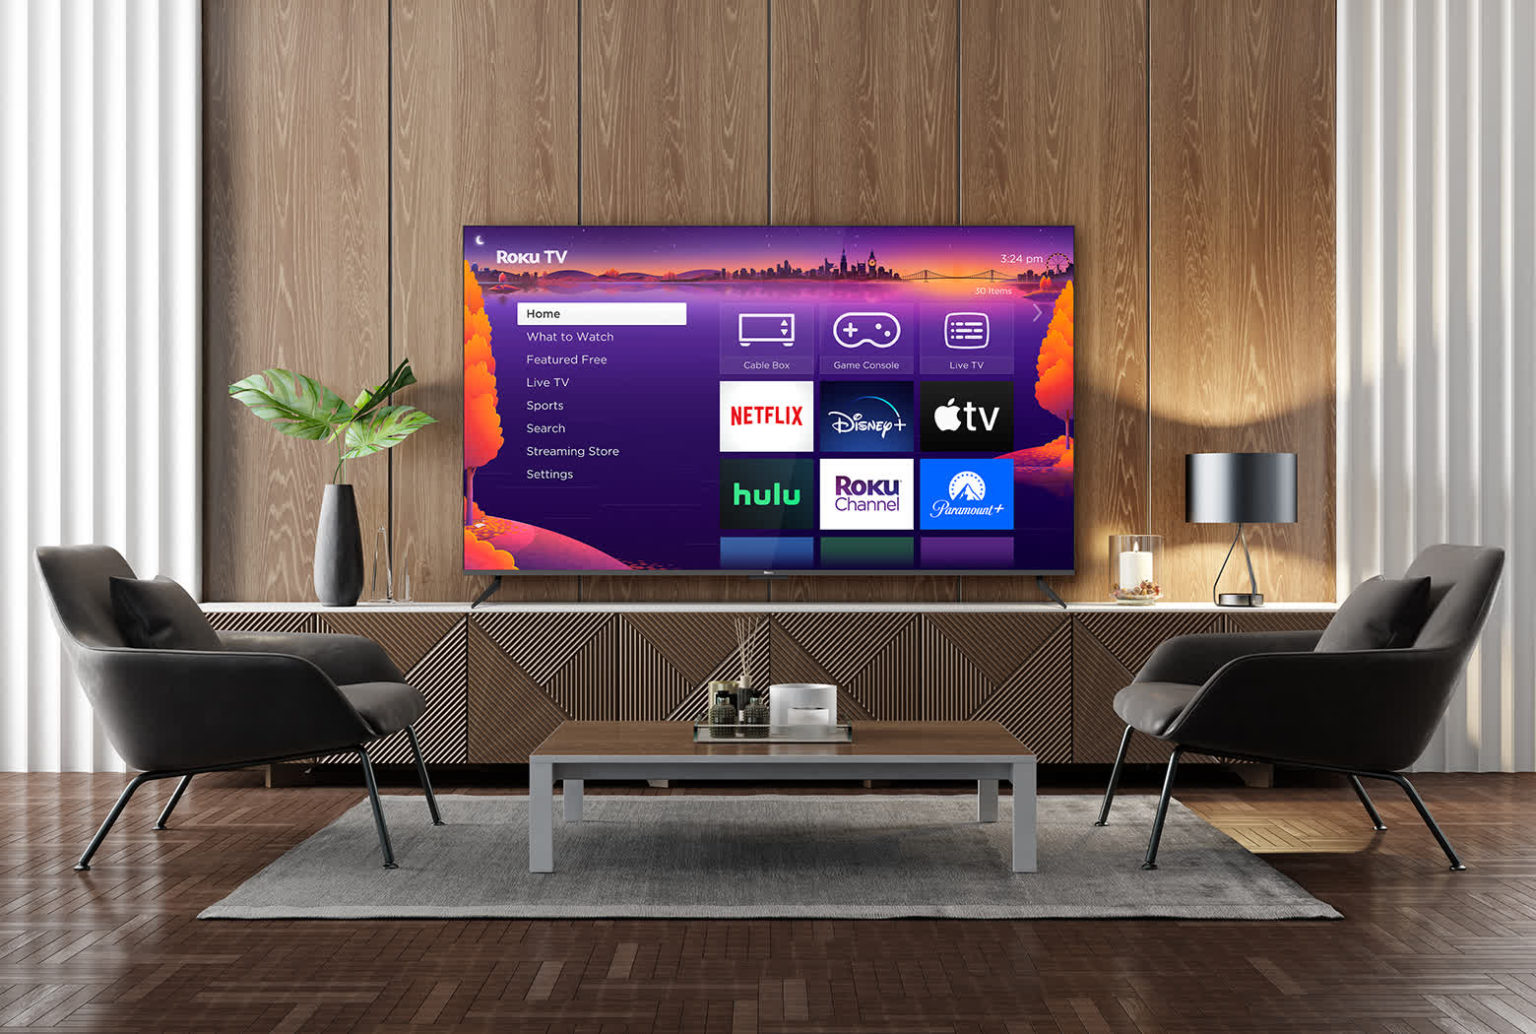 Roku crosses 80 million active accounts, but growth continues to slow